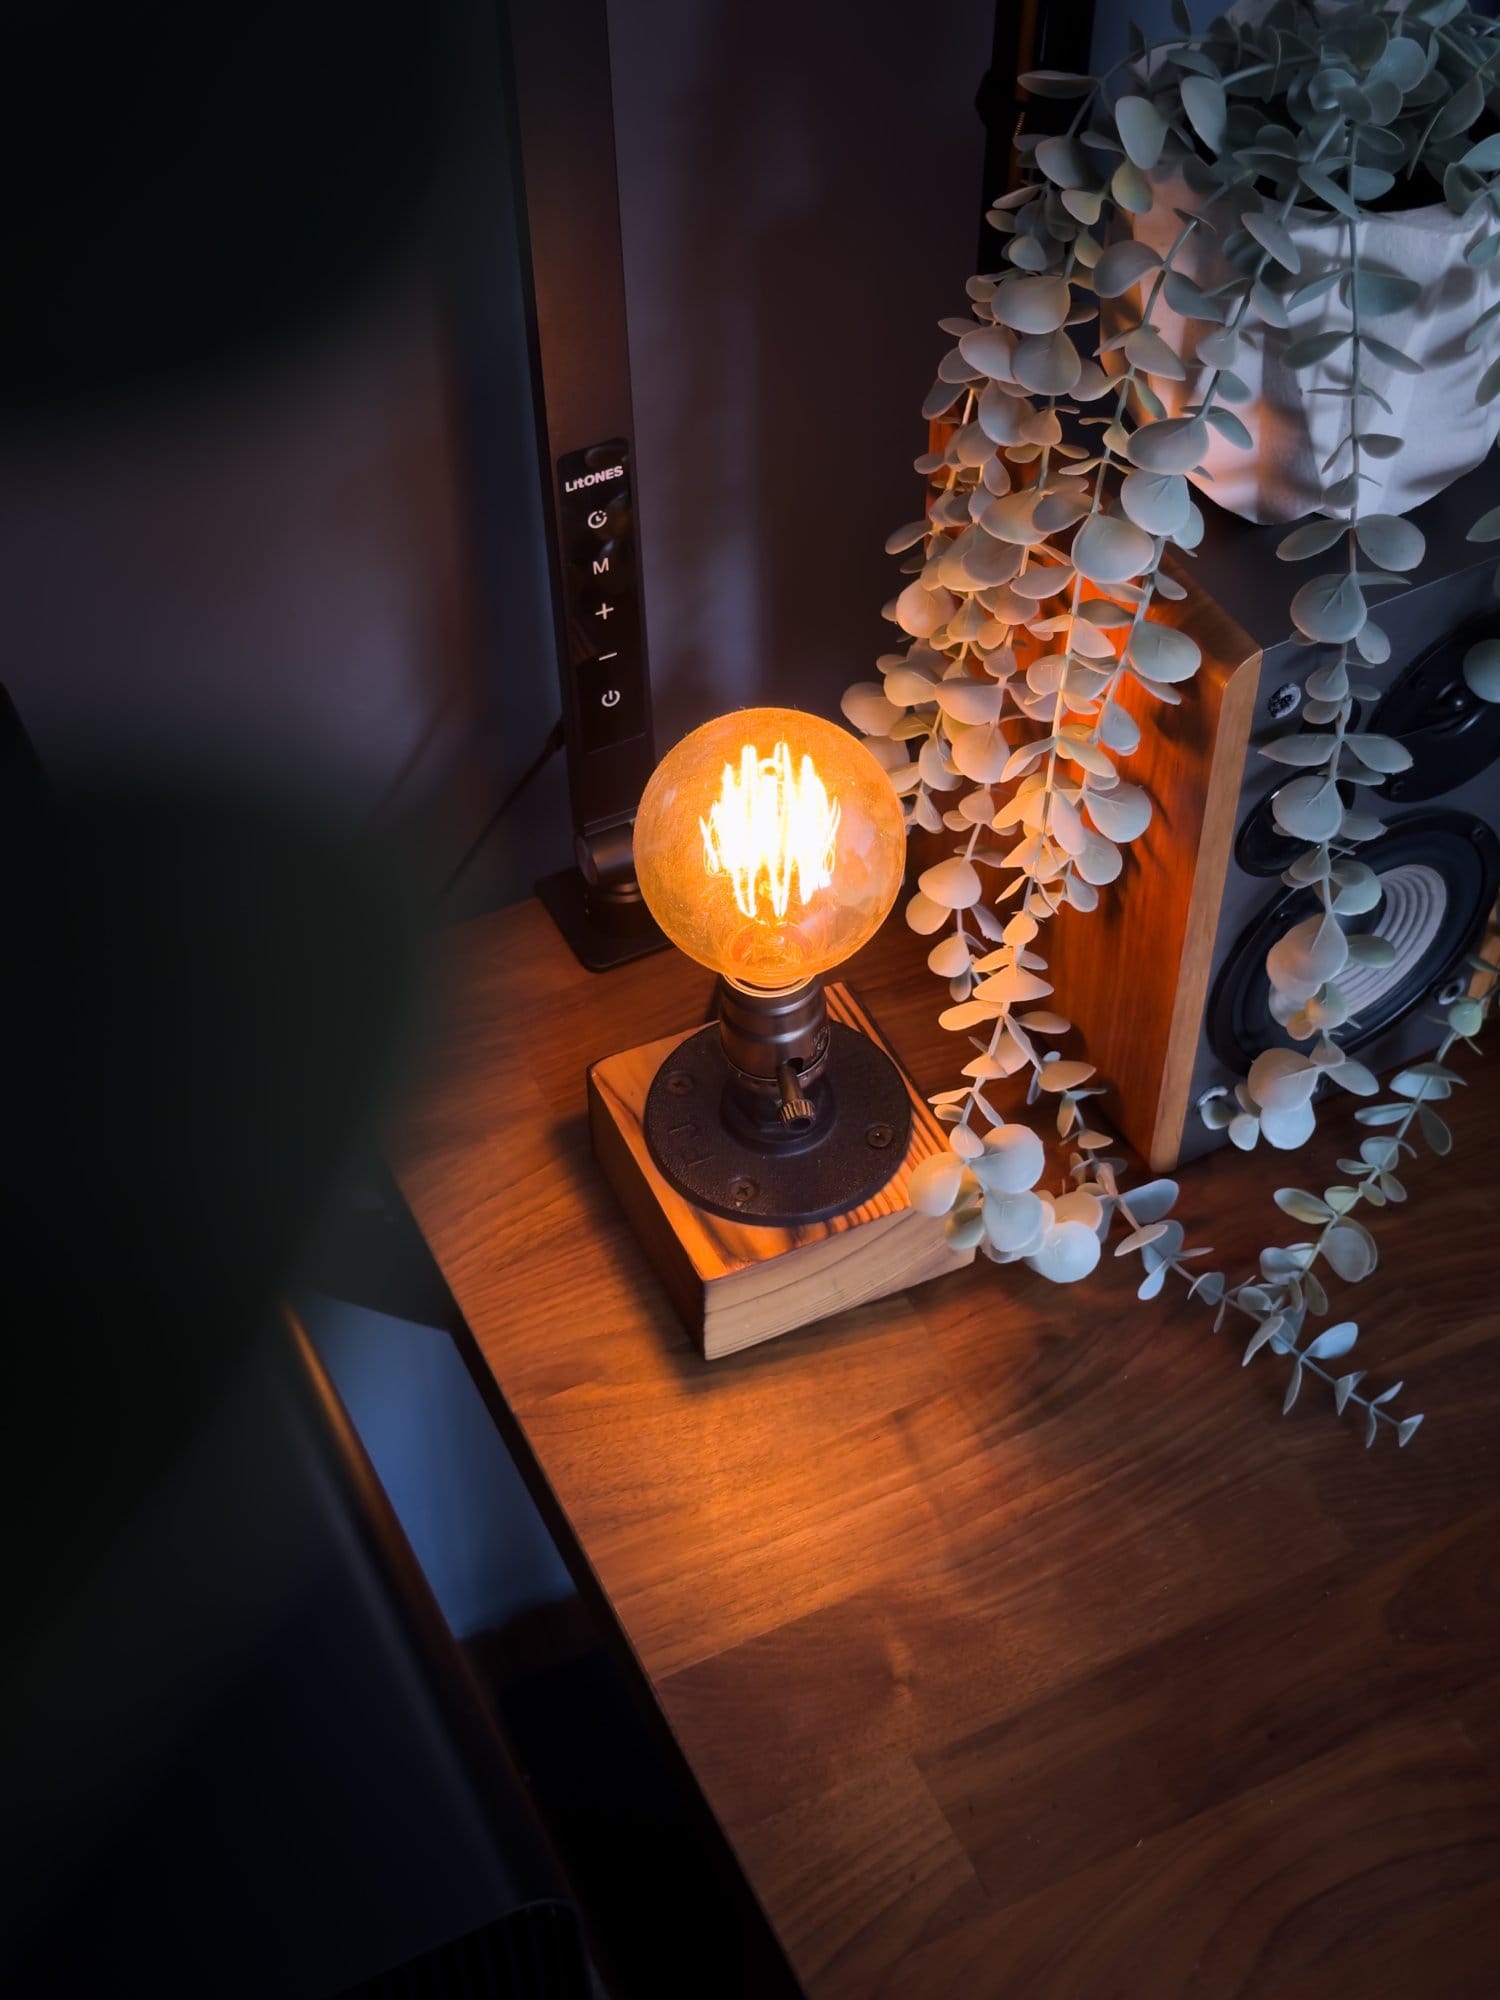 A cozy desk corner featuring a vintage-style bulb lamp next to a plant and an Edifier R1280T speaker